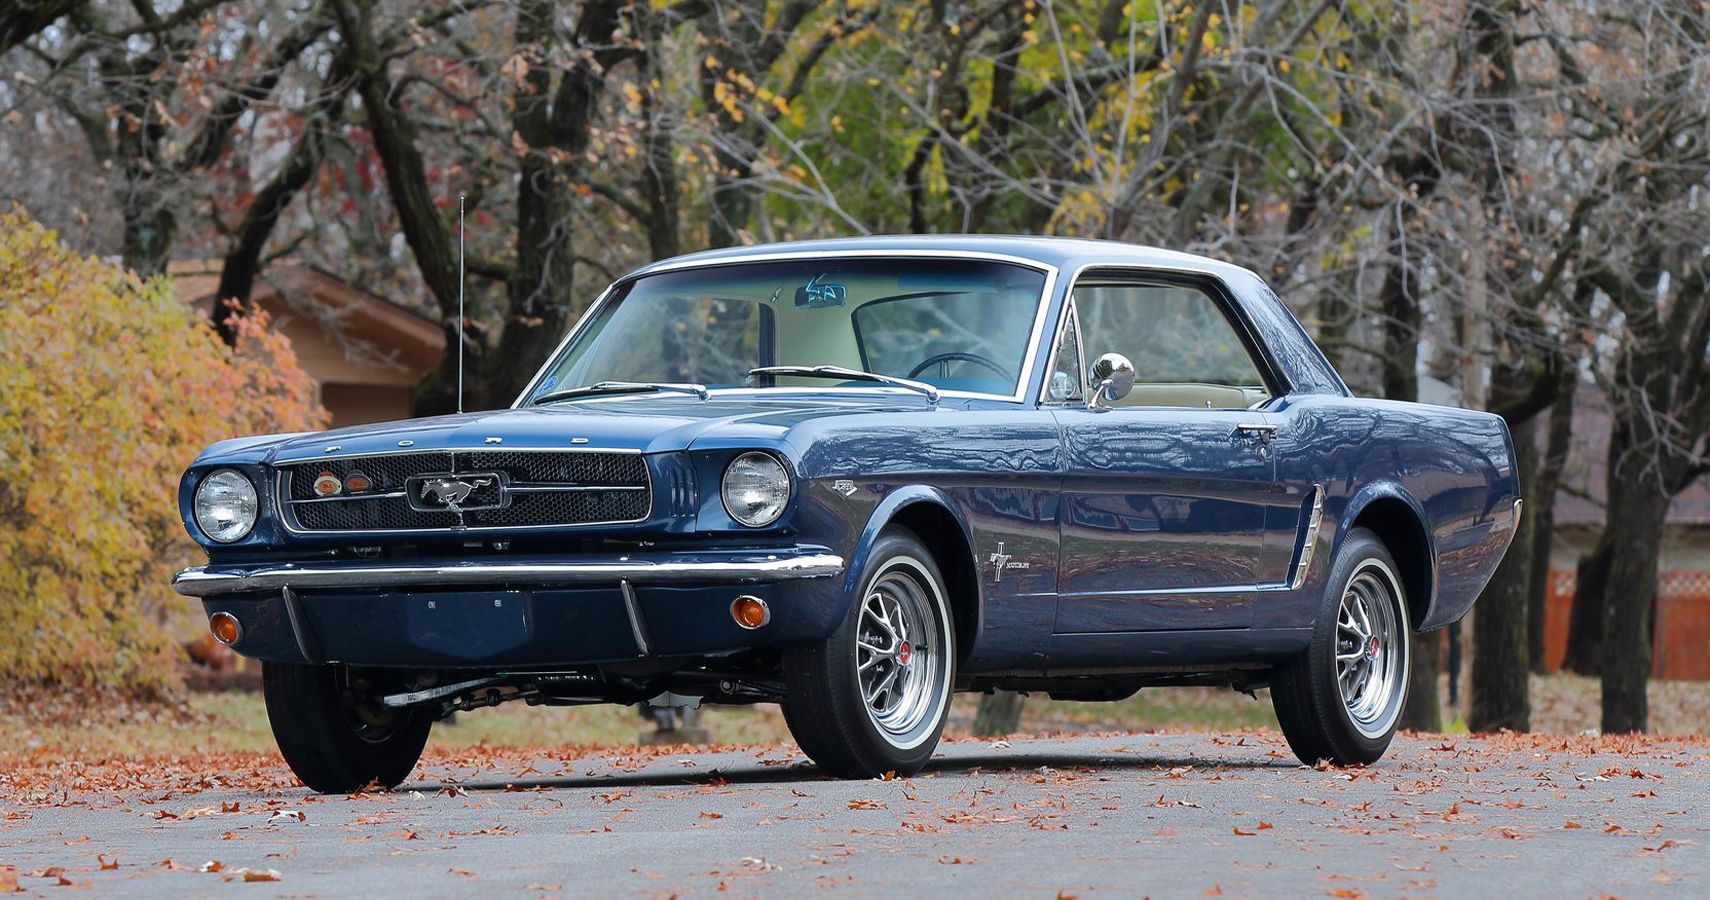 1964 Is Known To Be The Birth Year Of The Mustang, Although Since The ‘Stang Came In April, It's Usually Called 1964.5 Or 1964½